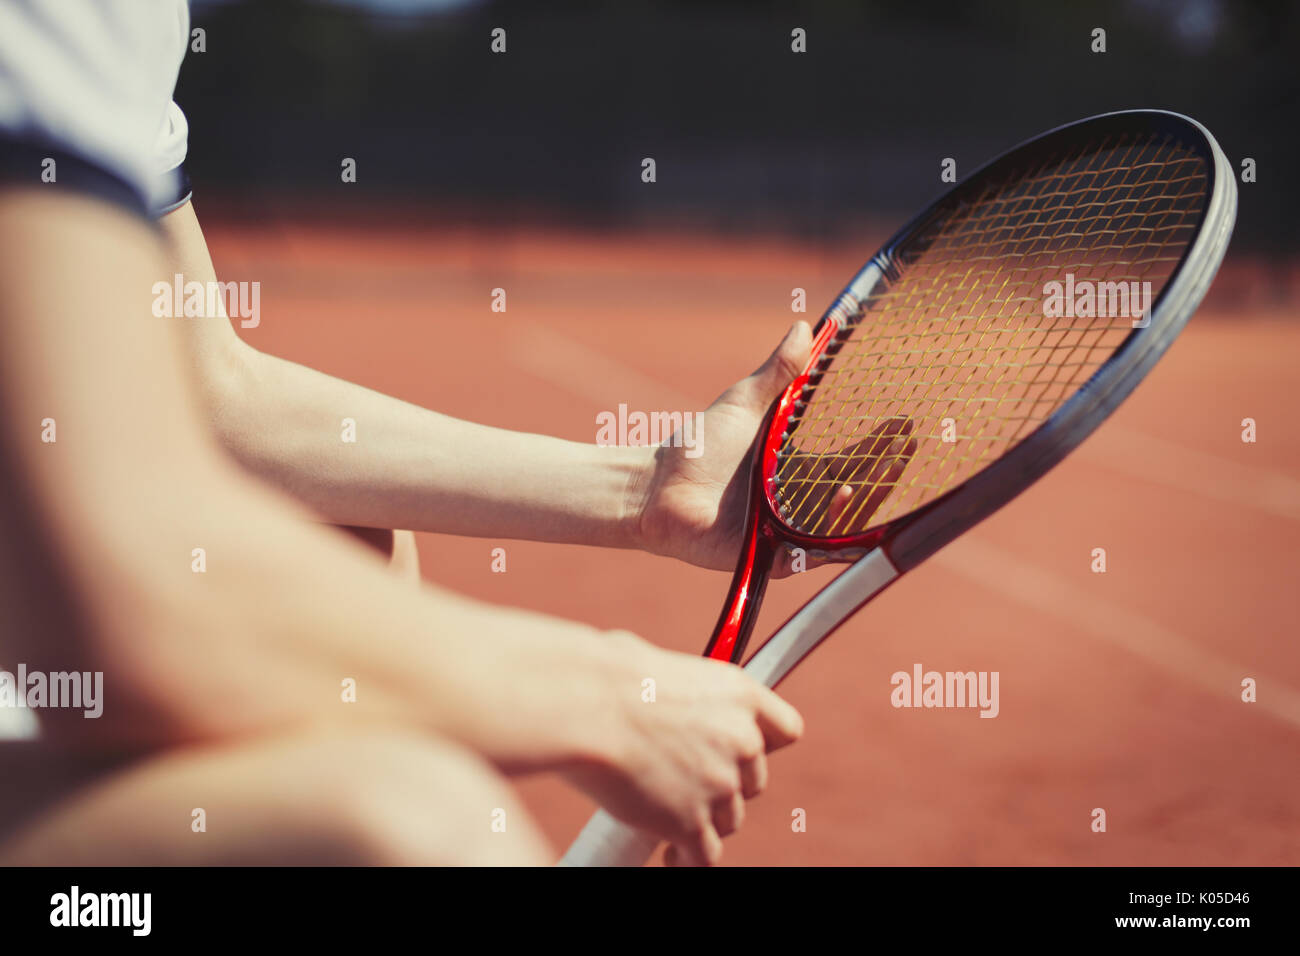 Young male tennis player holding tennis racket Stock Photo